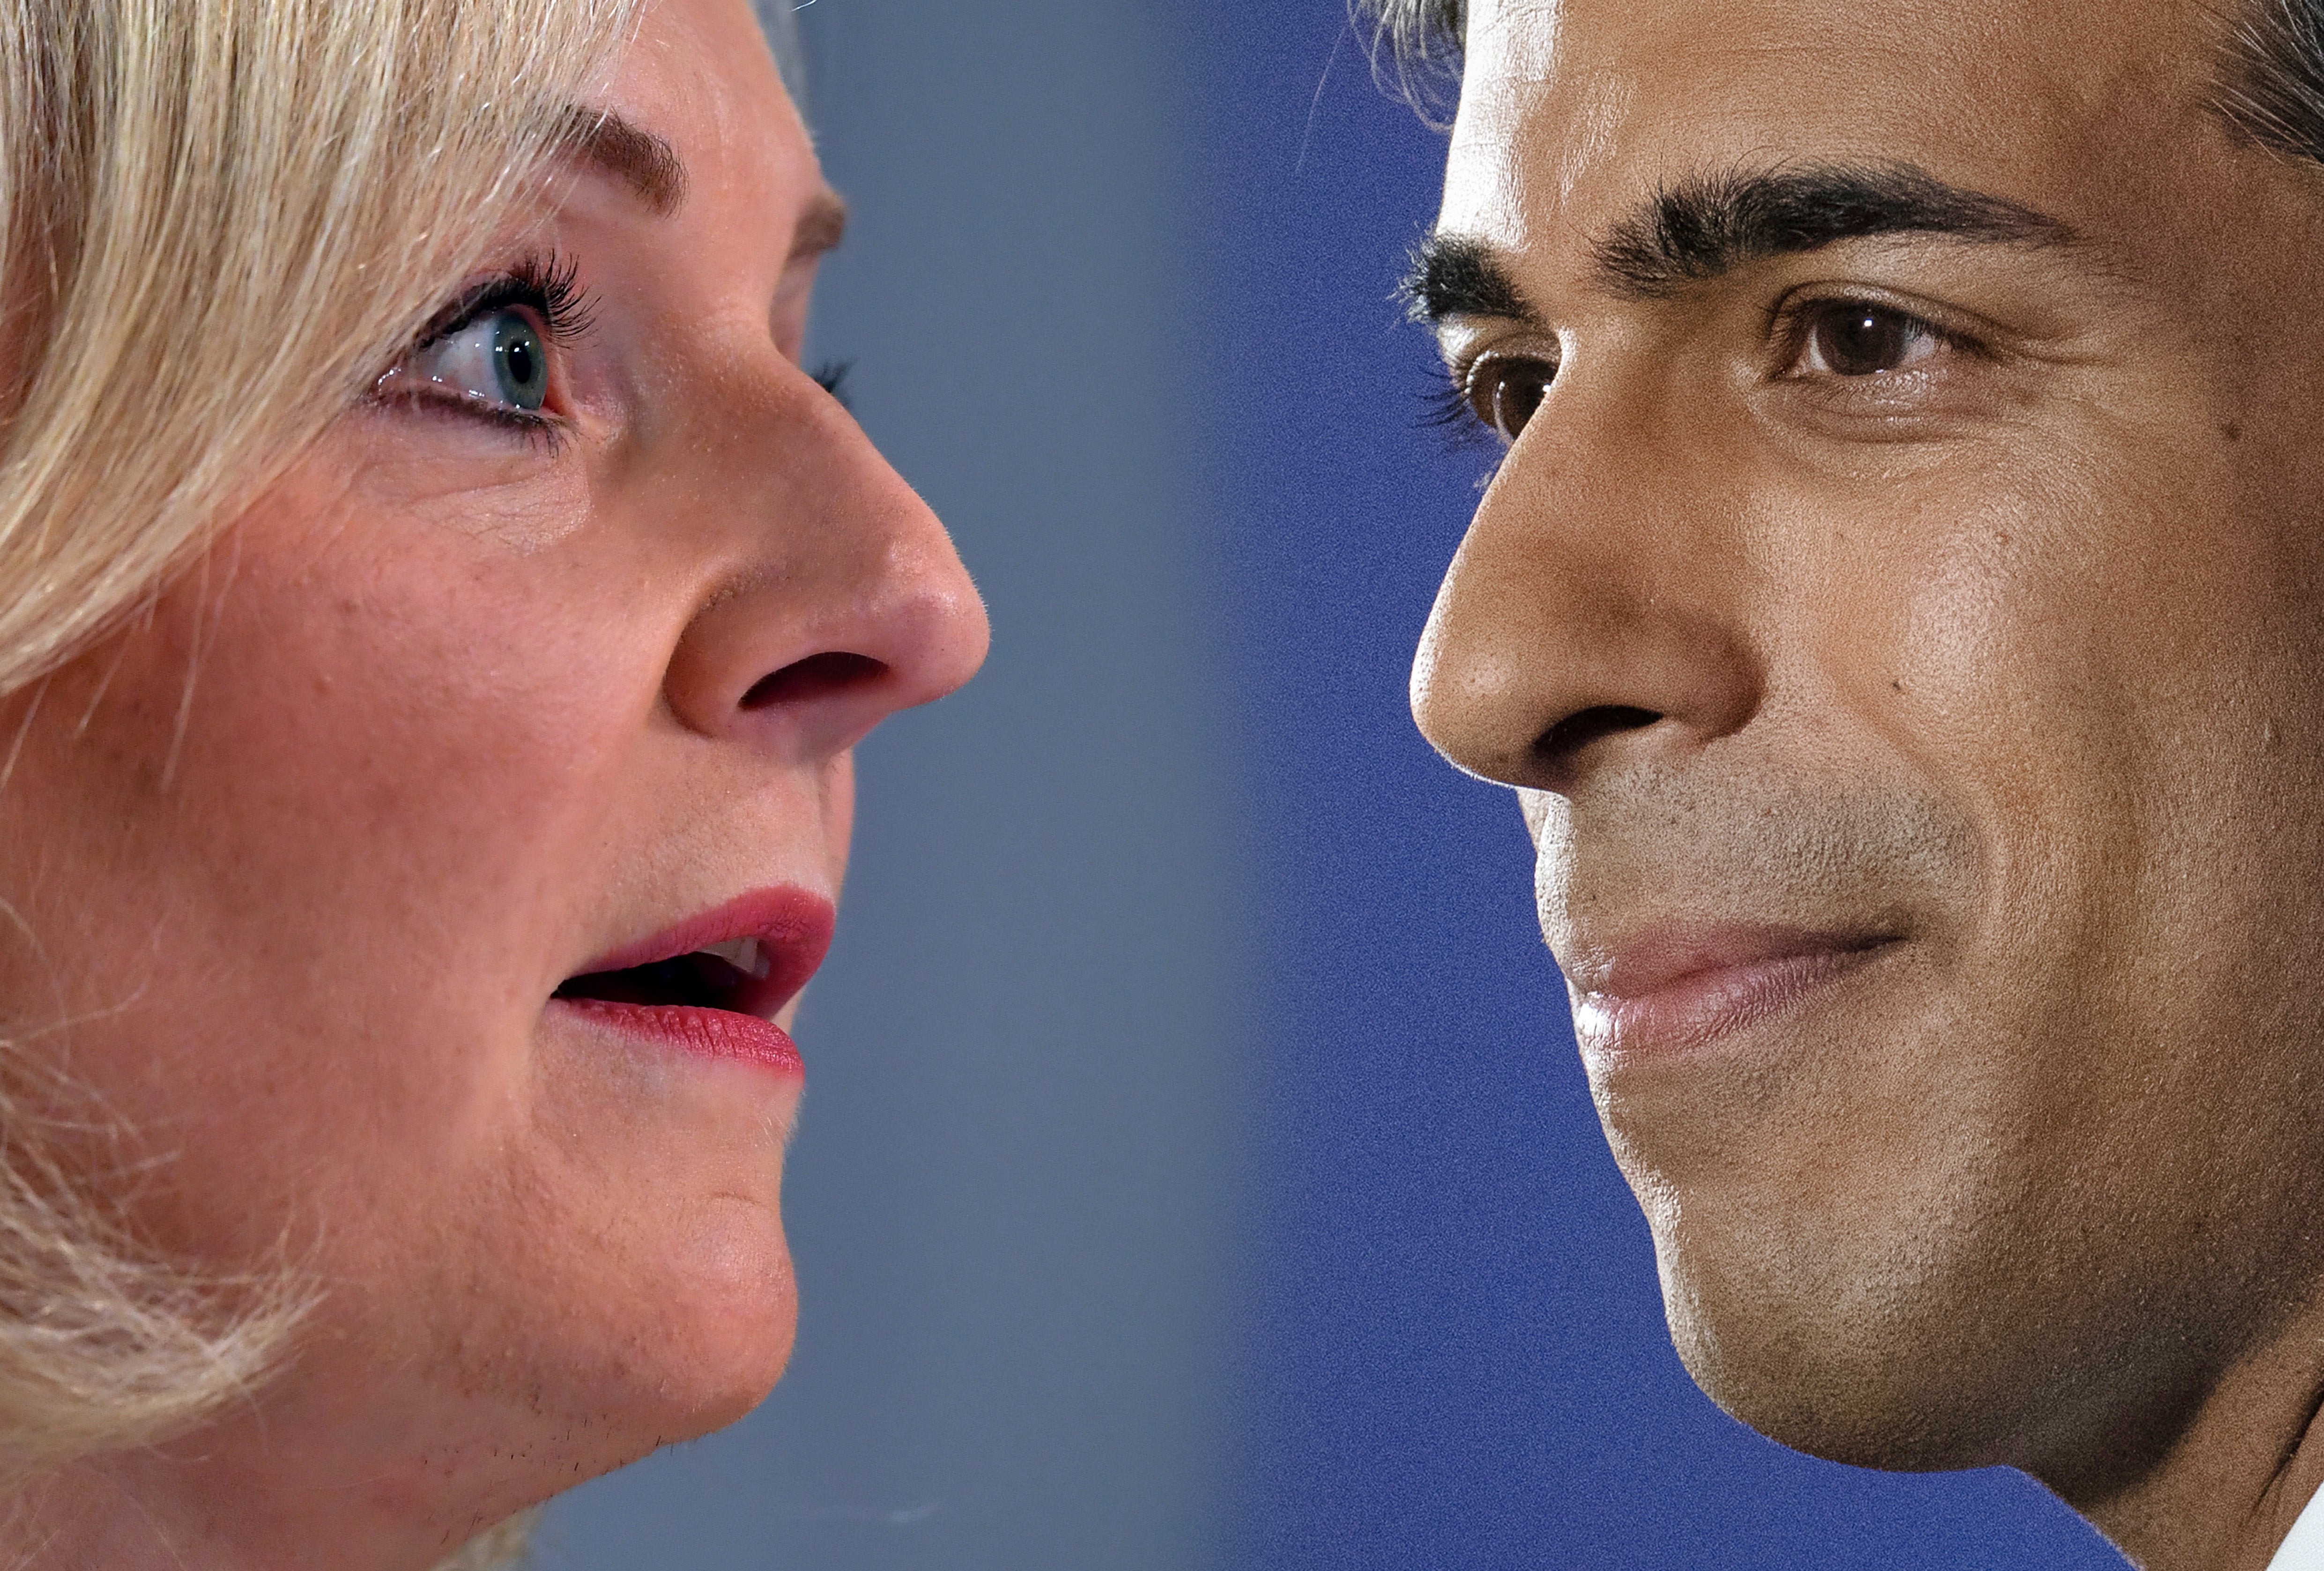 Liz Truss or Rishi Sunak face the prospect of leading a country entering recession